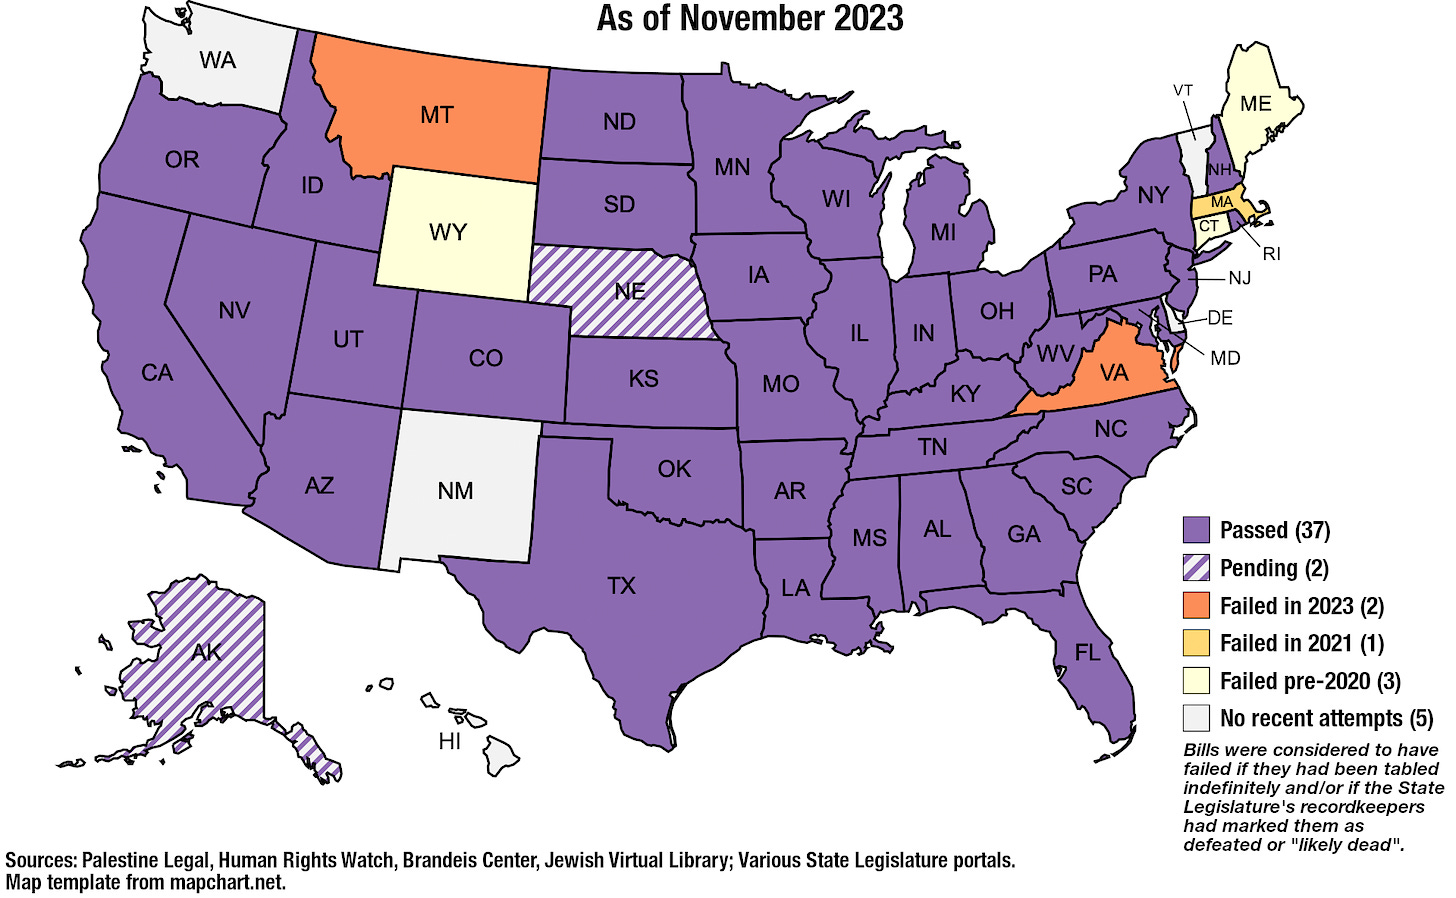 Map of the United States, with each state shaded by a color representing the status of "anti-BDS" legislation in that state. 37 states are marked purple, indicating anti-BDS legislation has passed. Nebraska and Alaska have purple and white stripes, indicating that anti-BDS legislation is currently pending. Virginia and Montana are orange, indicating anti-BDS legislation was proposed but failed in 2023. Massachusetts is yellow, indicating anti-BDS legislation failed in 2021. Maine, Connecticut, and Wyoming are pale yellow, indicating anti-BDS legislation was proposed but failed to pass prior to 2020. Hawai'i, Washington, New Mexico, Delaware, and Vermont are gray, indicating that no anti-BDSs laws have been passed and none have made it to the floor of their state legislatures in recent years.